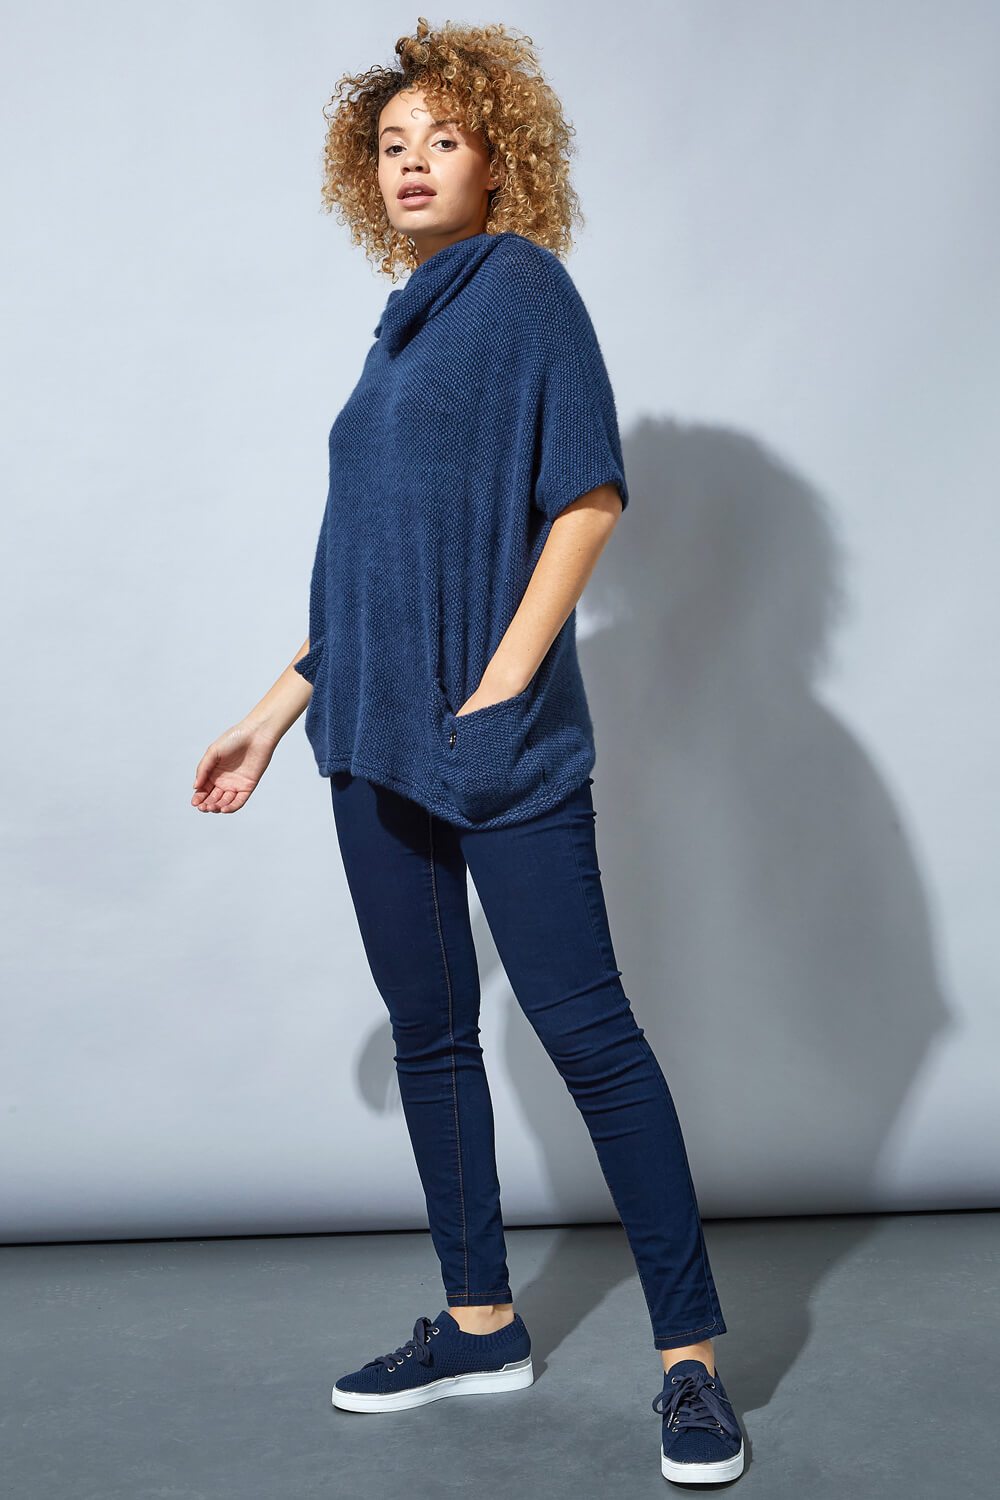 Blue Cowl Neck Textured Tunic Top, Image 2 of 4